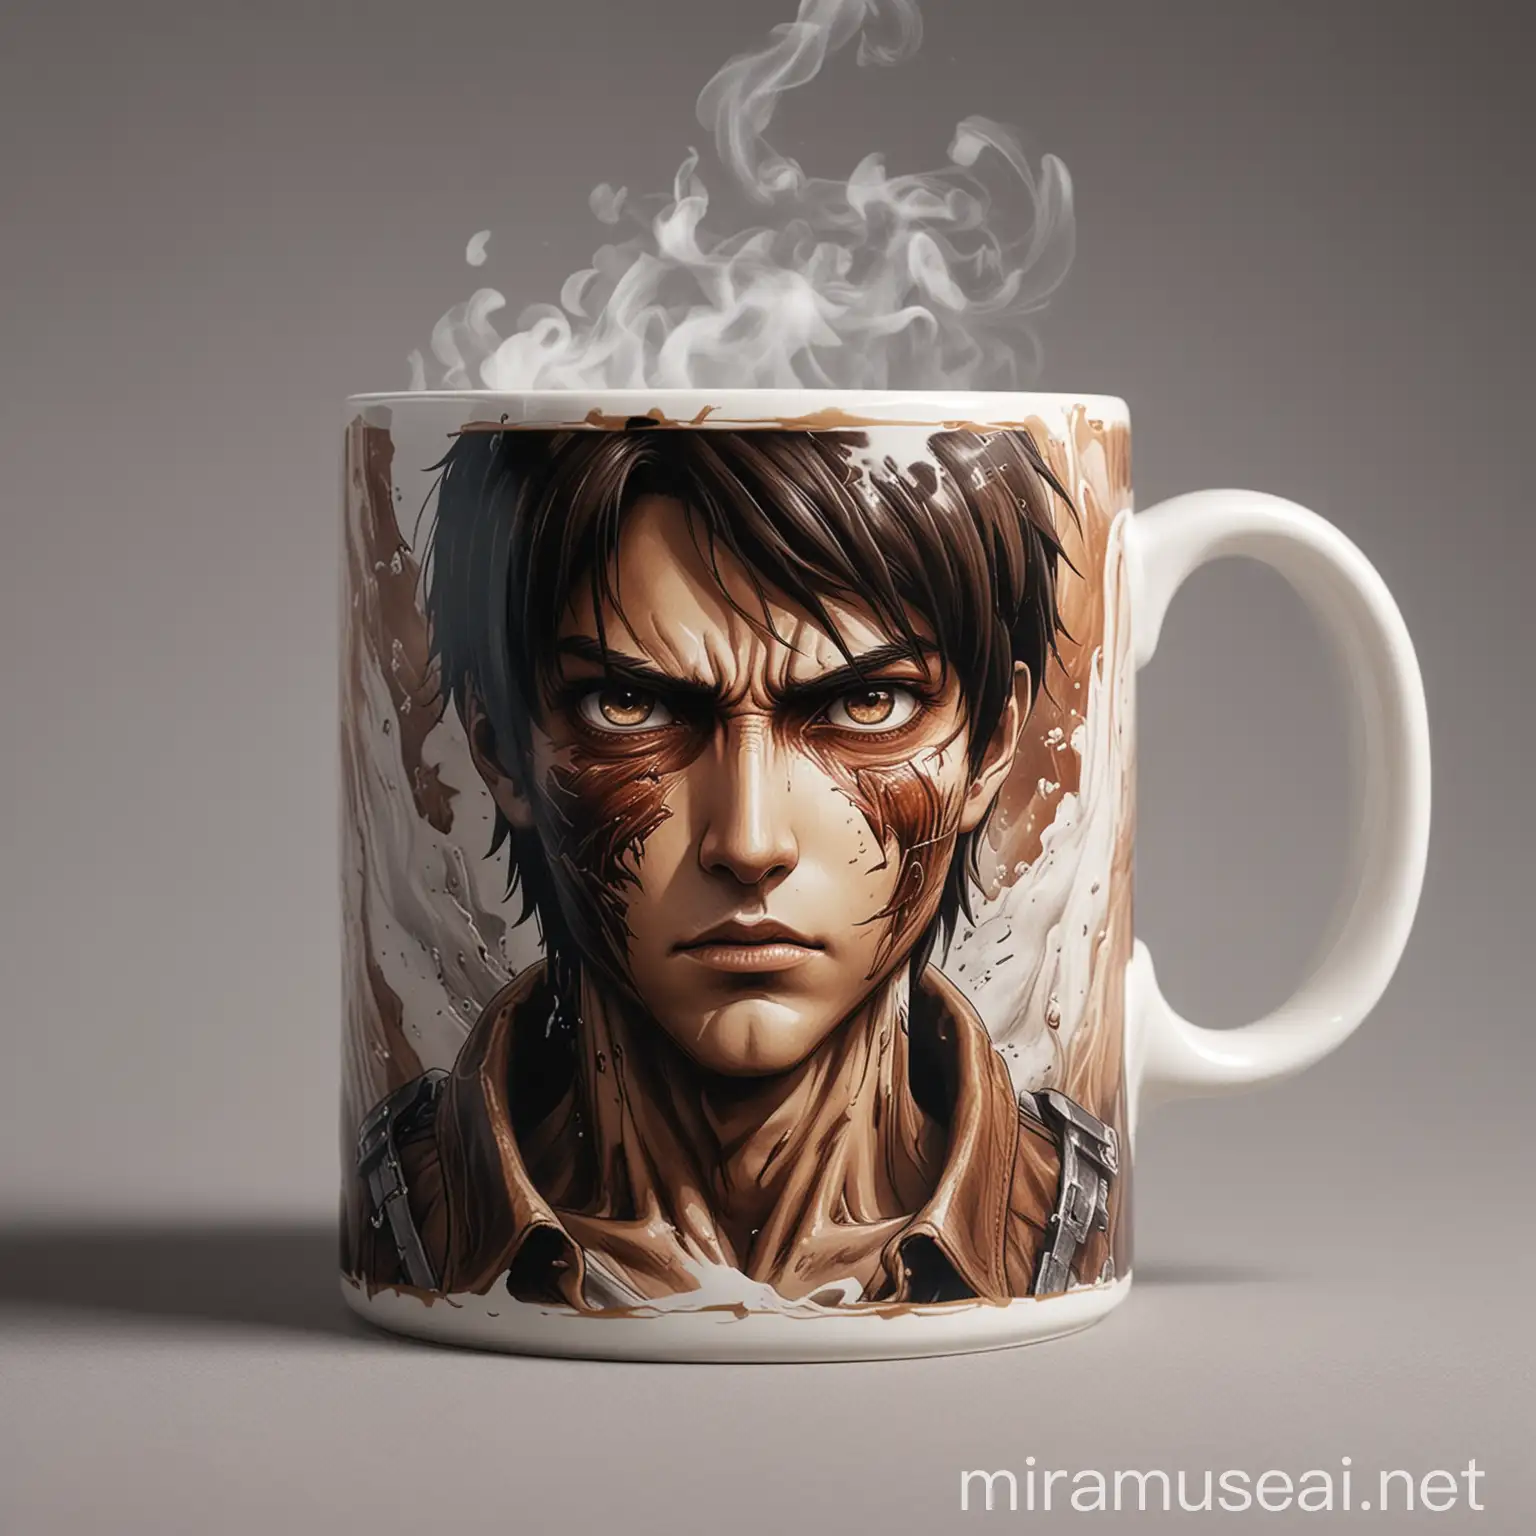 Detailed illustration of a ceramic mug, approximately 12 ounces in size, decorated with an Attack on Titan theme. In the center, feature a fierce portrait of Eren Yeager in his Attack Titan form. Steaming liquid fills the mug, with wisps resembling smoke from the battle within the walls. The handle can be shaped like the Attack Titan's key or any other recognizable element from the series.